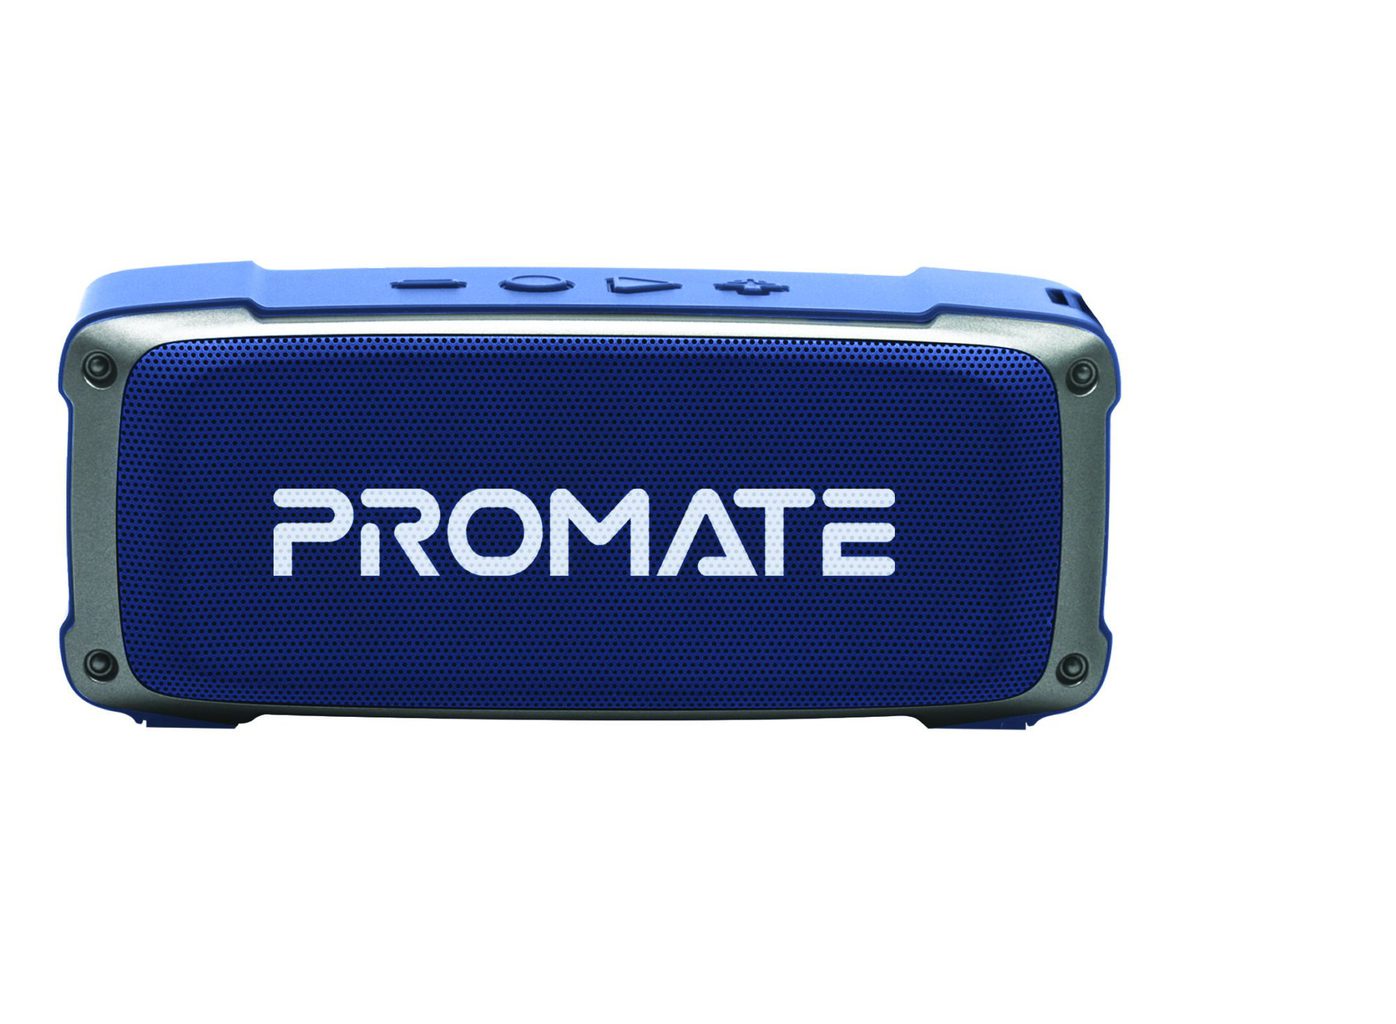 Promate Bluetooth Speaker, Premium 6W HD Rugged Wireless Speaker with 4H Playtime, Built-in Mic, FM Radio, 3.5mm Aux Port, TF Card Slot and USB Media Port for iPhone 12, iPad Pro, iPod, Android, OutBeat Blue